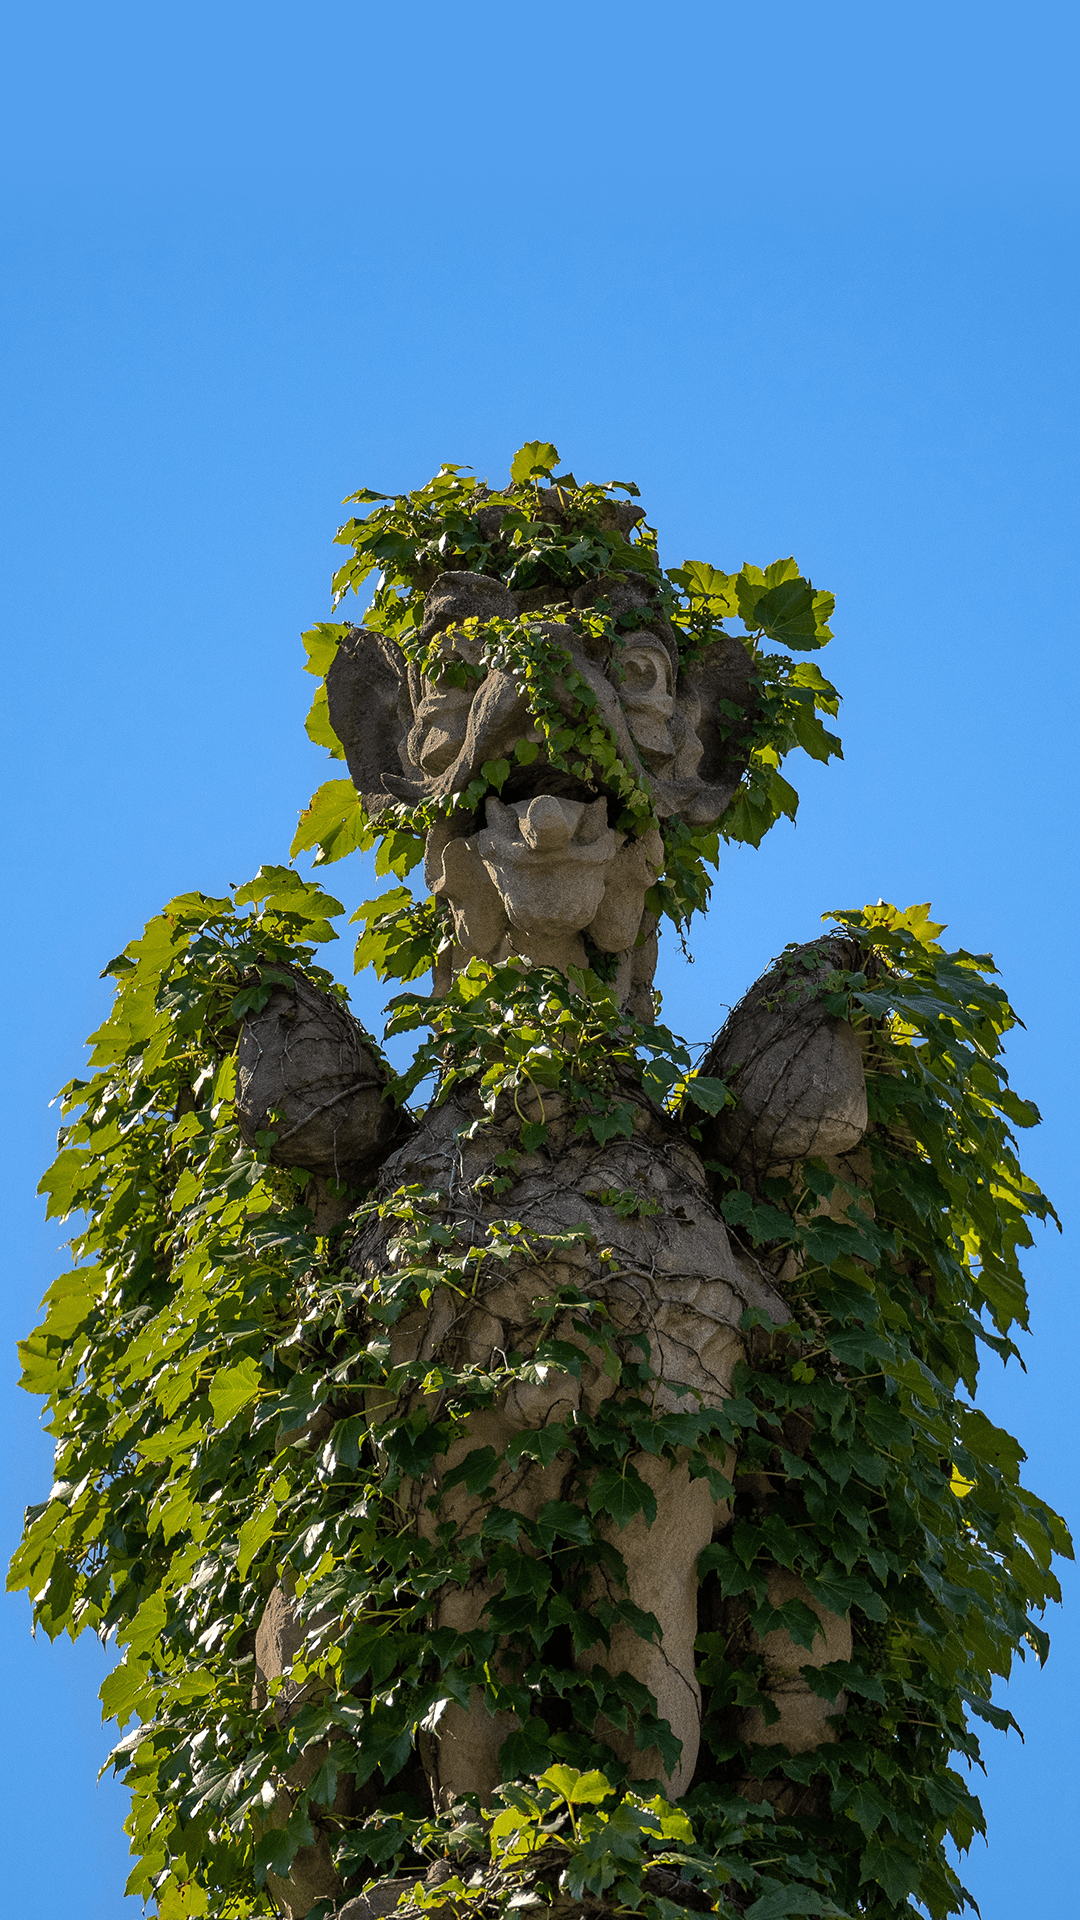 Gargoyle stone sculpture covered in green ivy against a blue sky